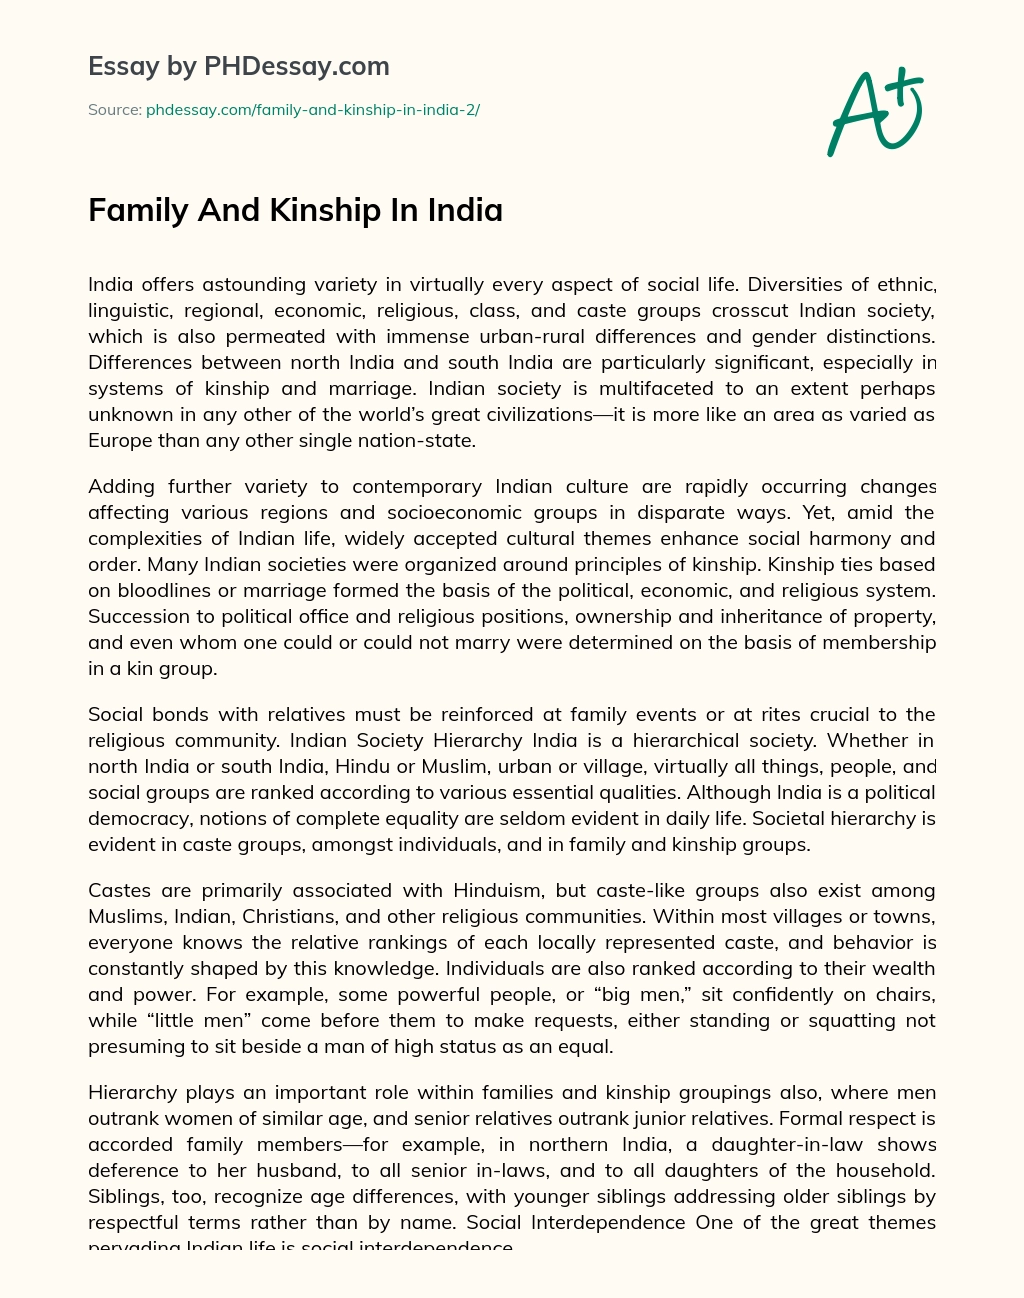 Family And Kinship In India essay